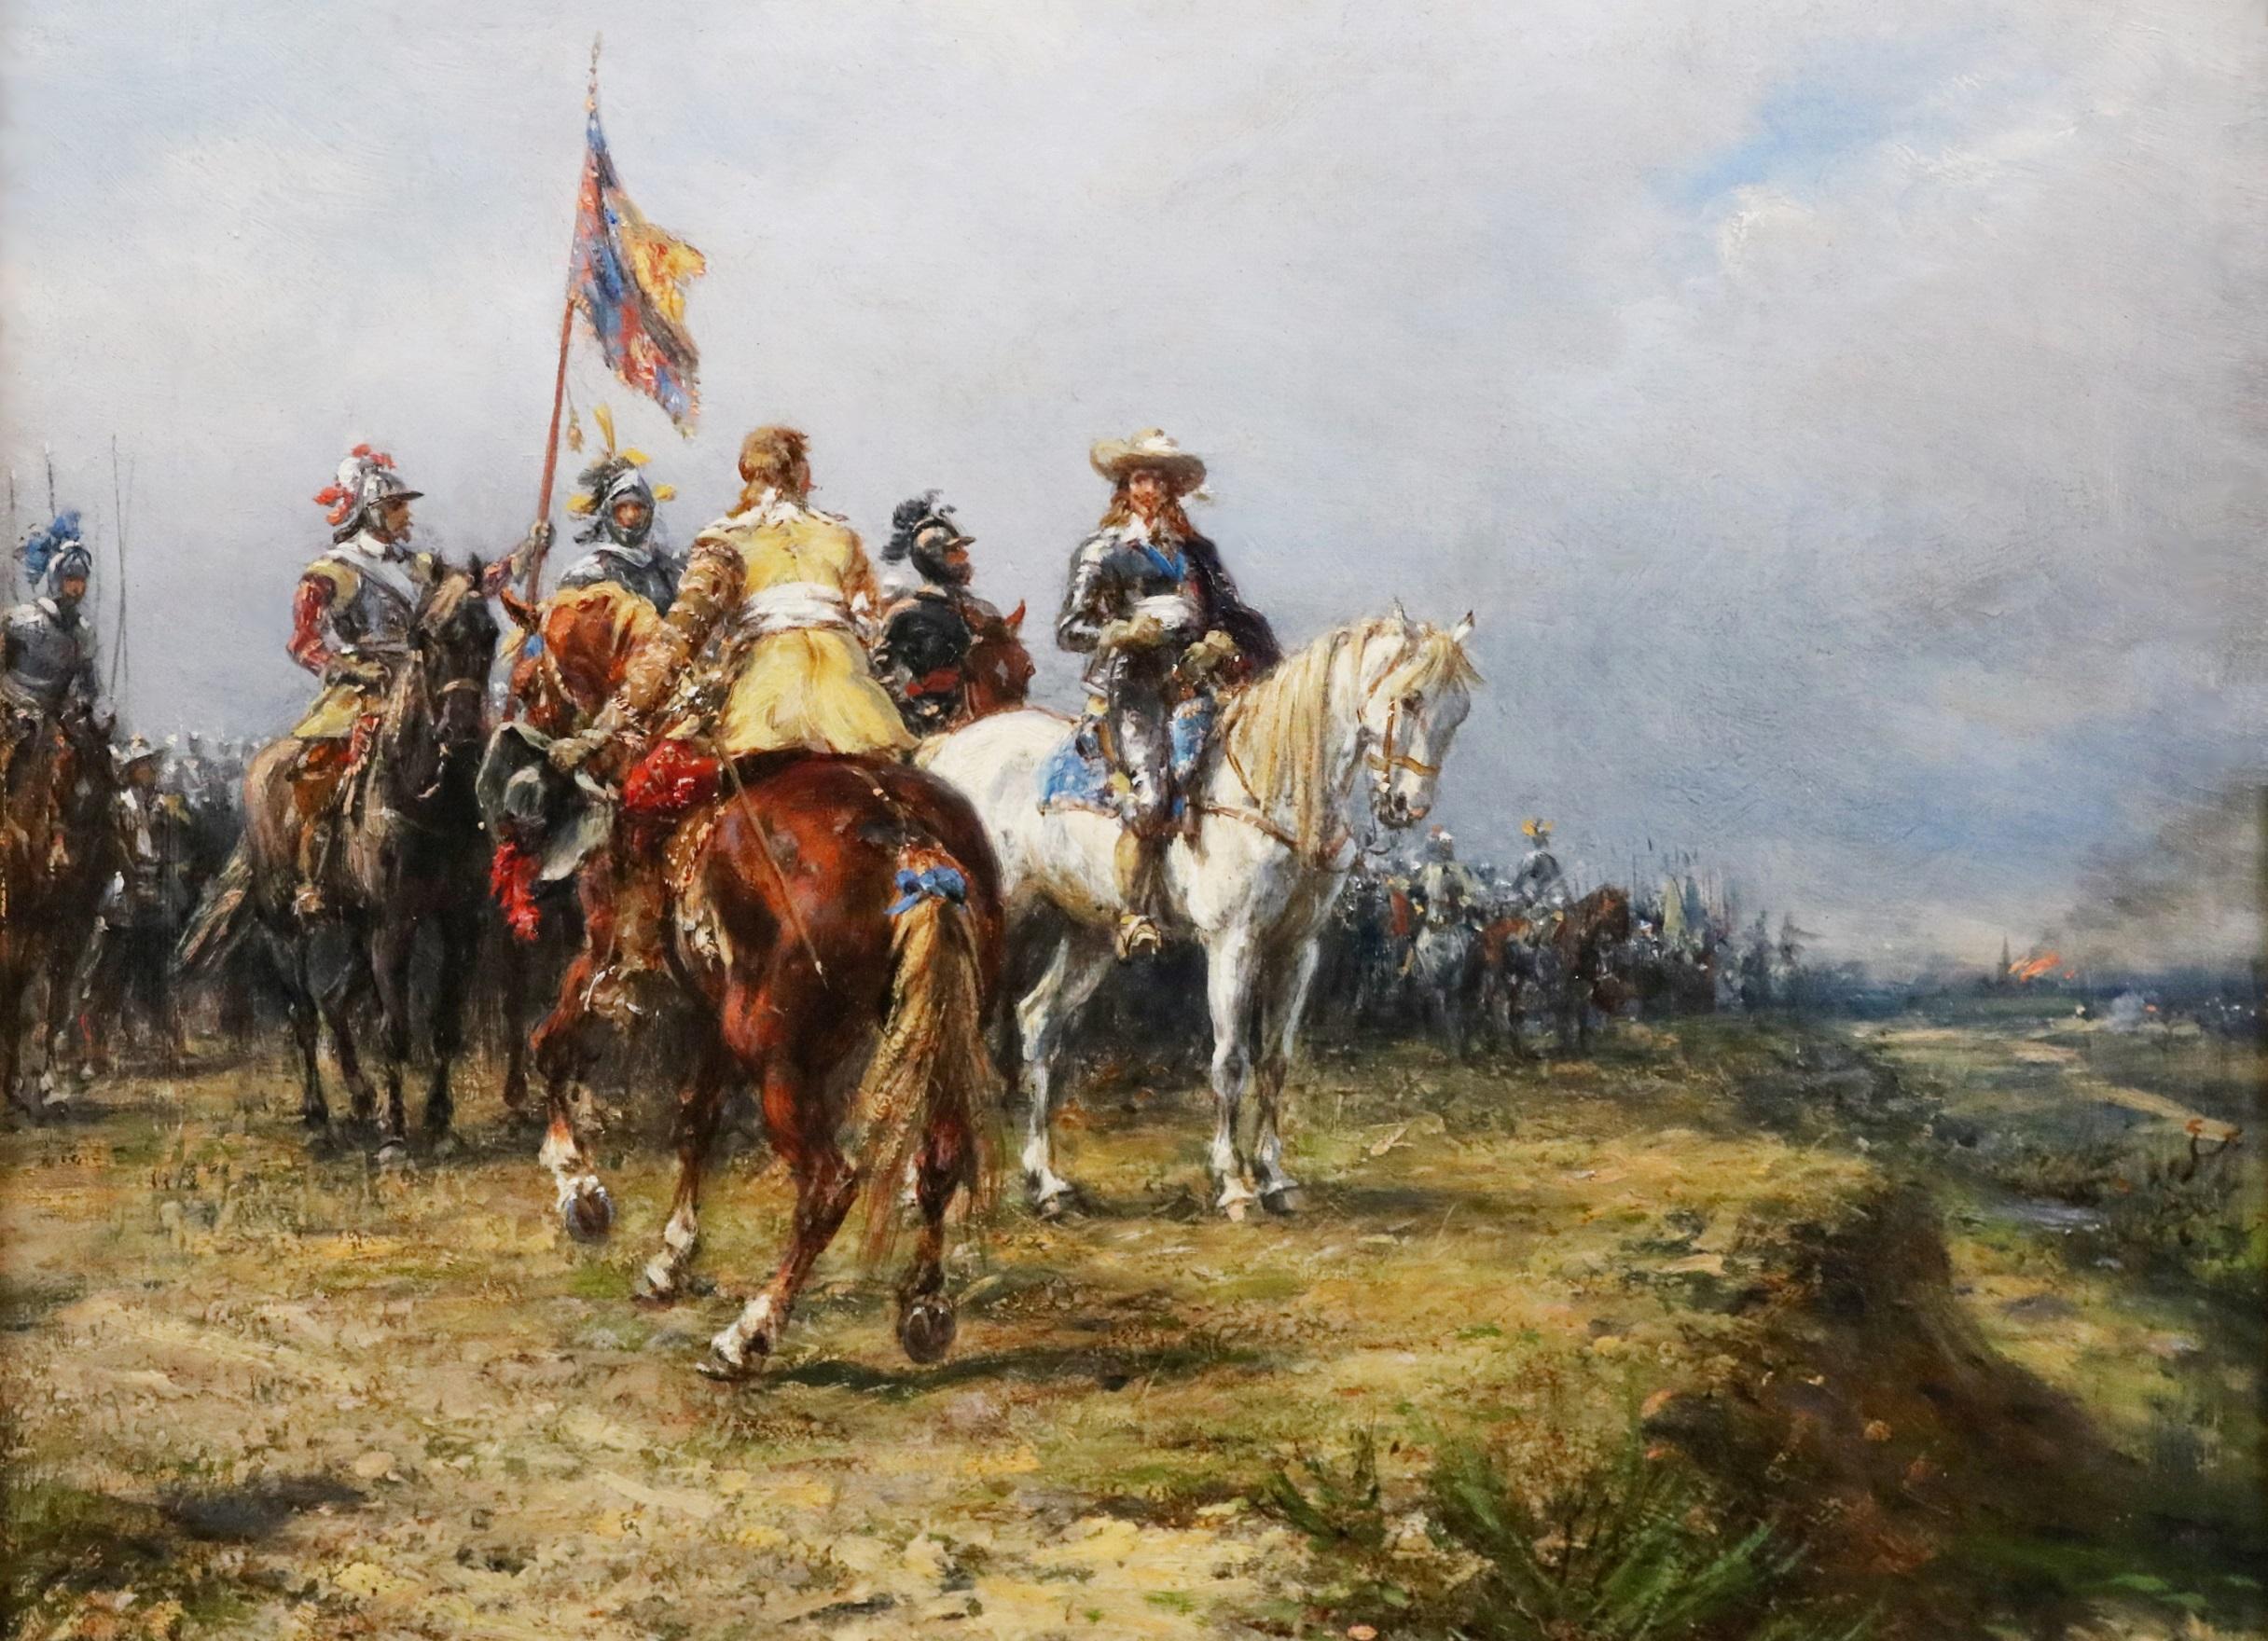 ‘Charles I at Edgehill’ by Ernest Crofts RA (1847–1911). The painting – which depicts King Charles I and his retinue at the first battle of the English Civil War in 1642 – is signed by the artist and dated 1892 in which year it was exhibited at the